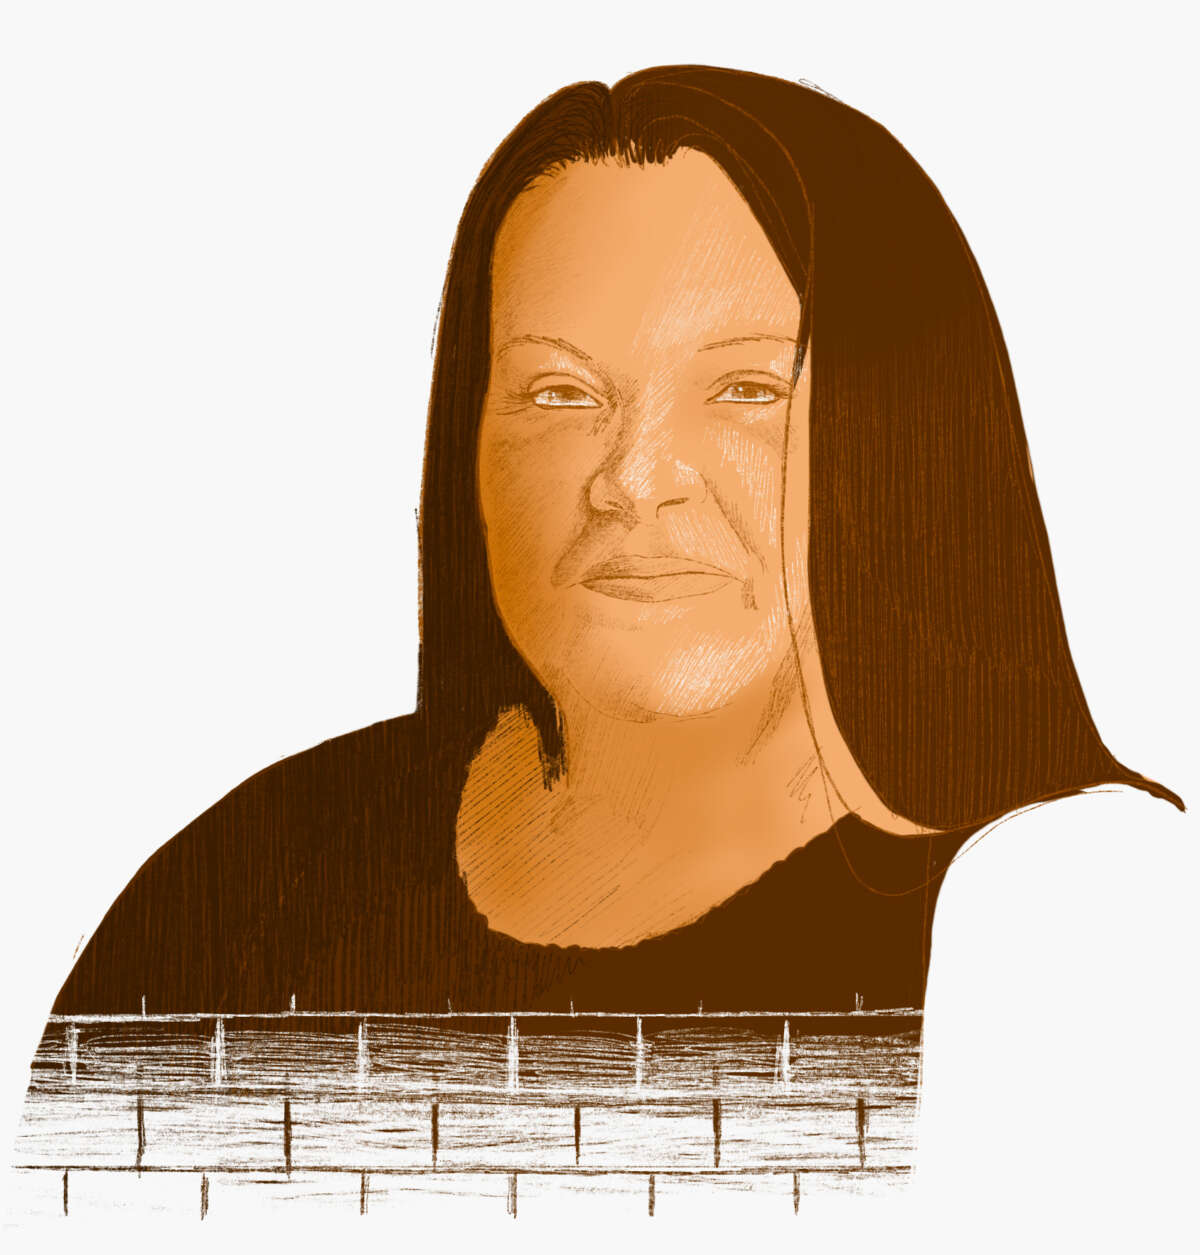 A digital illustration of a middle-aged woman